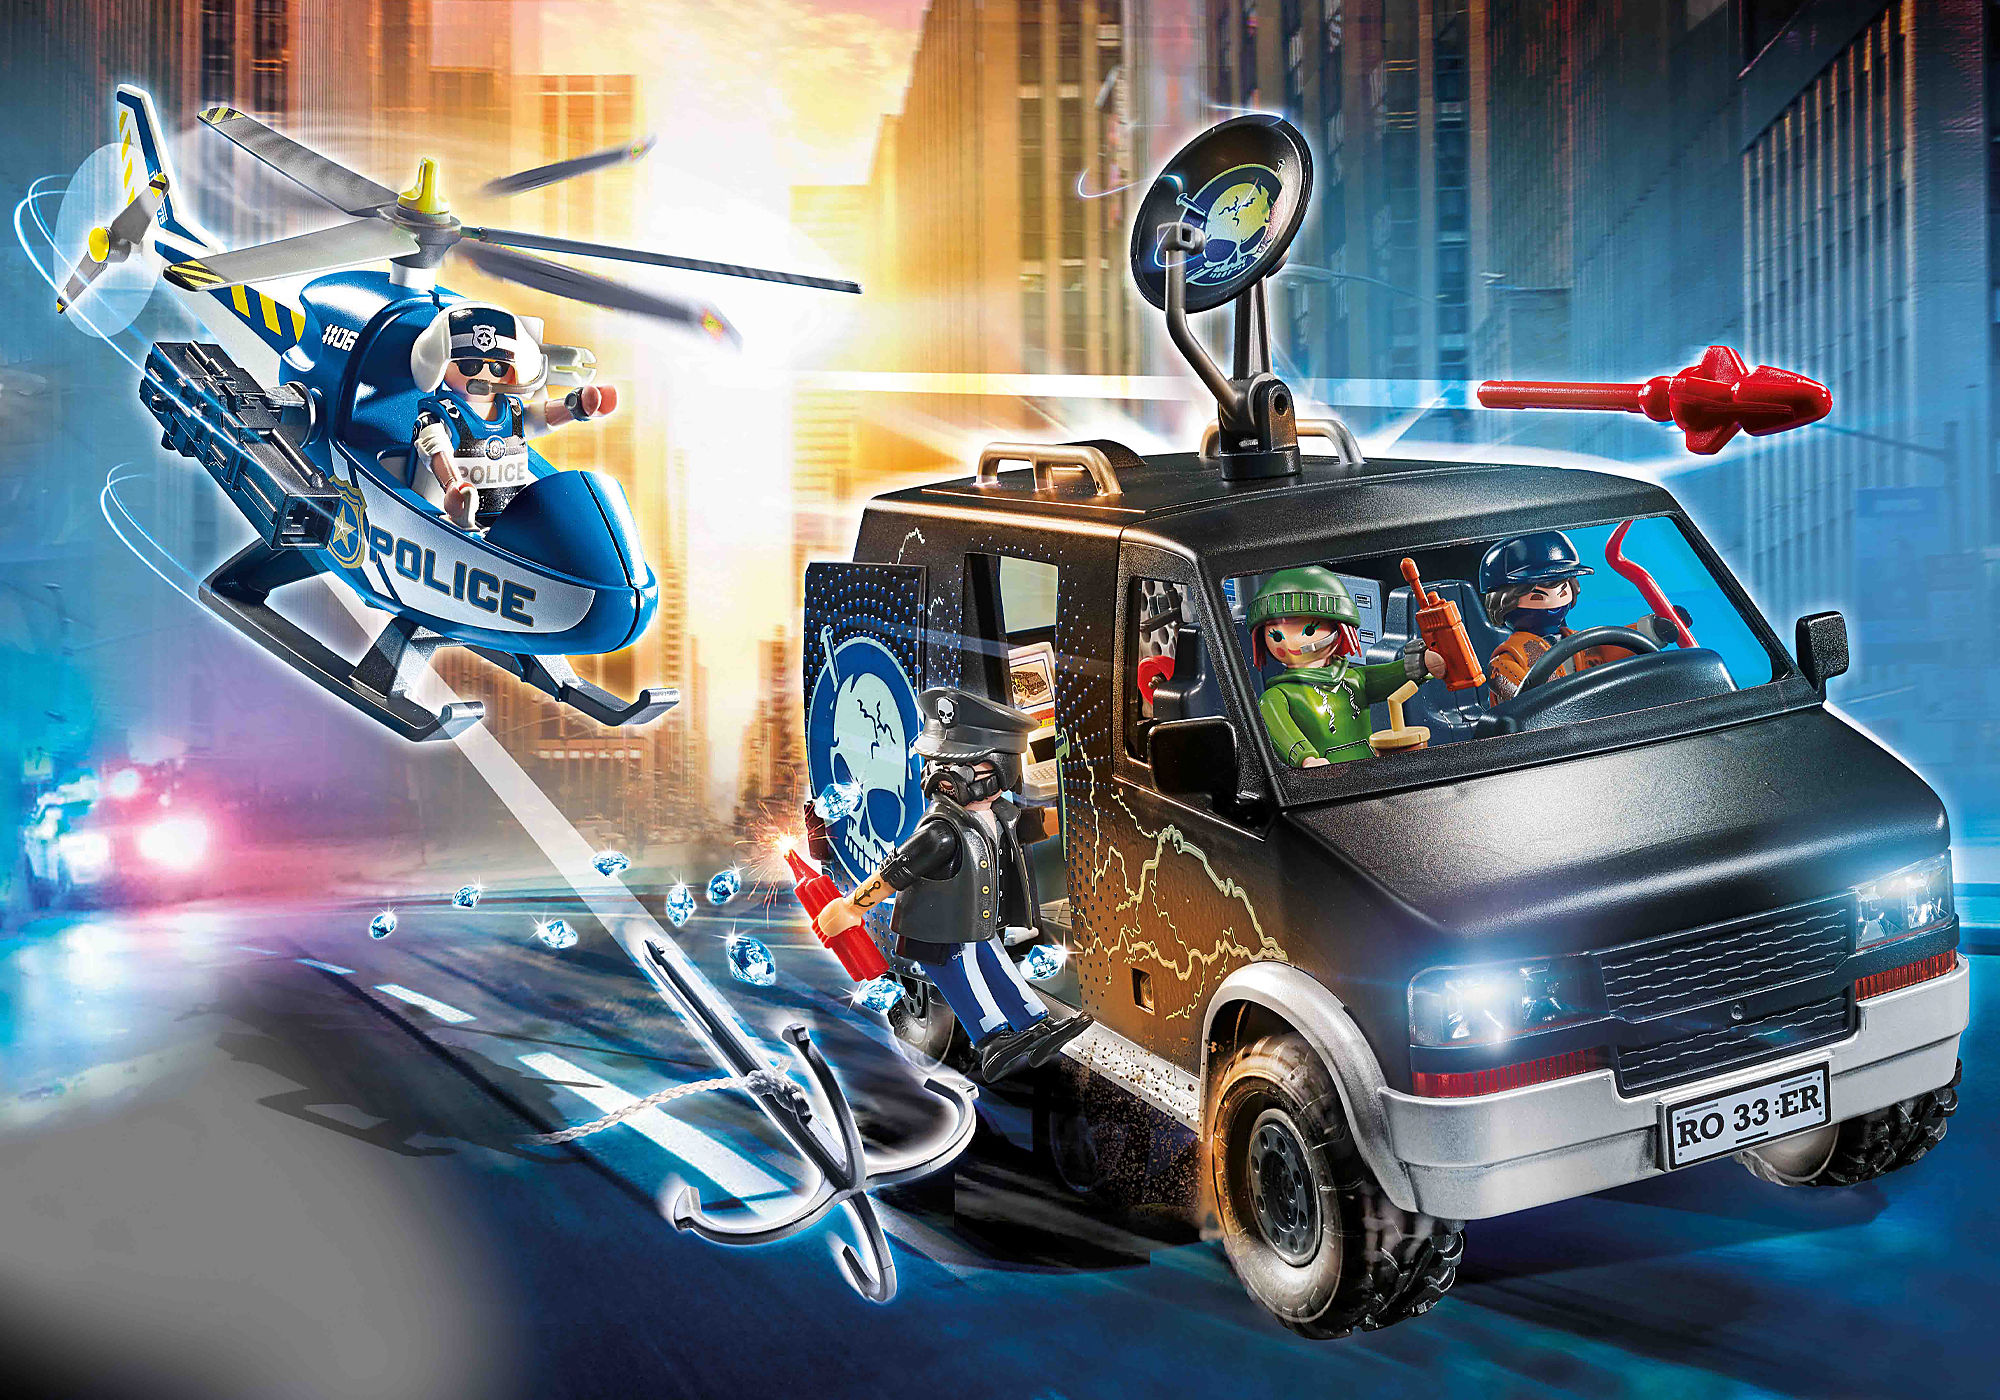 Playmobil City Action Police Helicopter Pursuit with Runaway Van (70575)